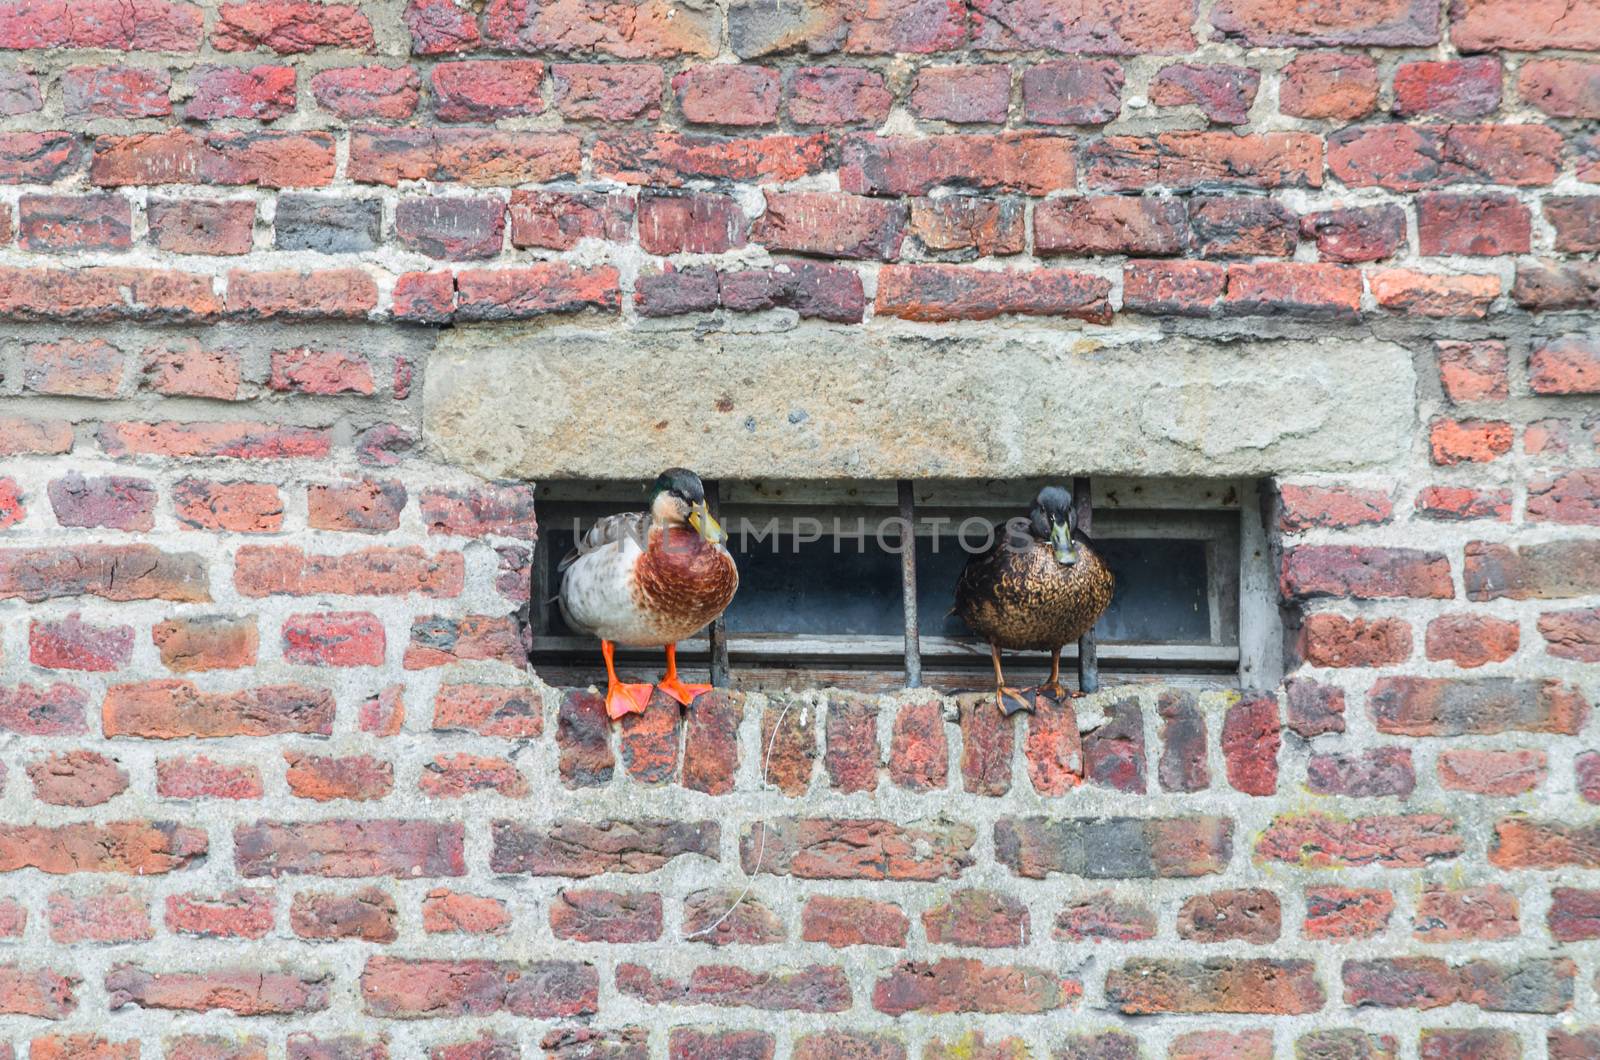 Two ducks on a projecting wall on a basement window.